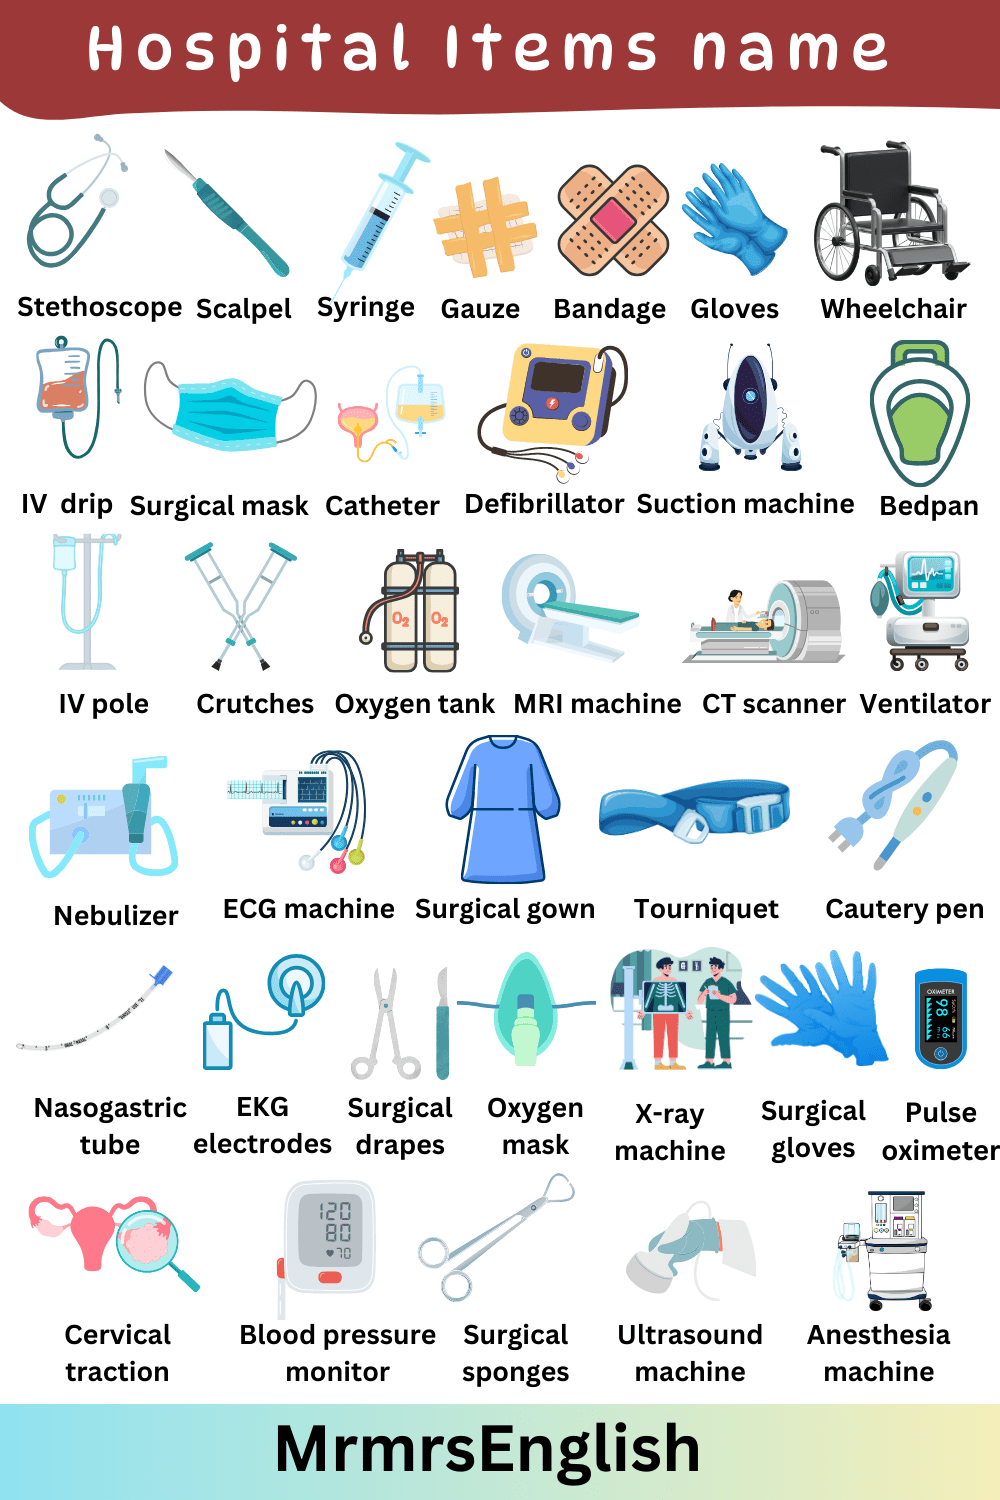 Hospital Vocabulary Words in English